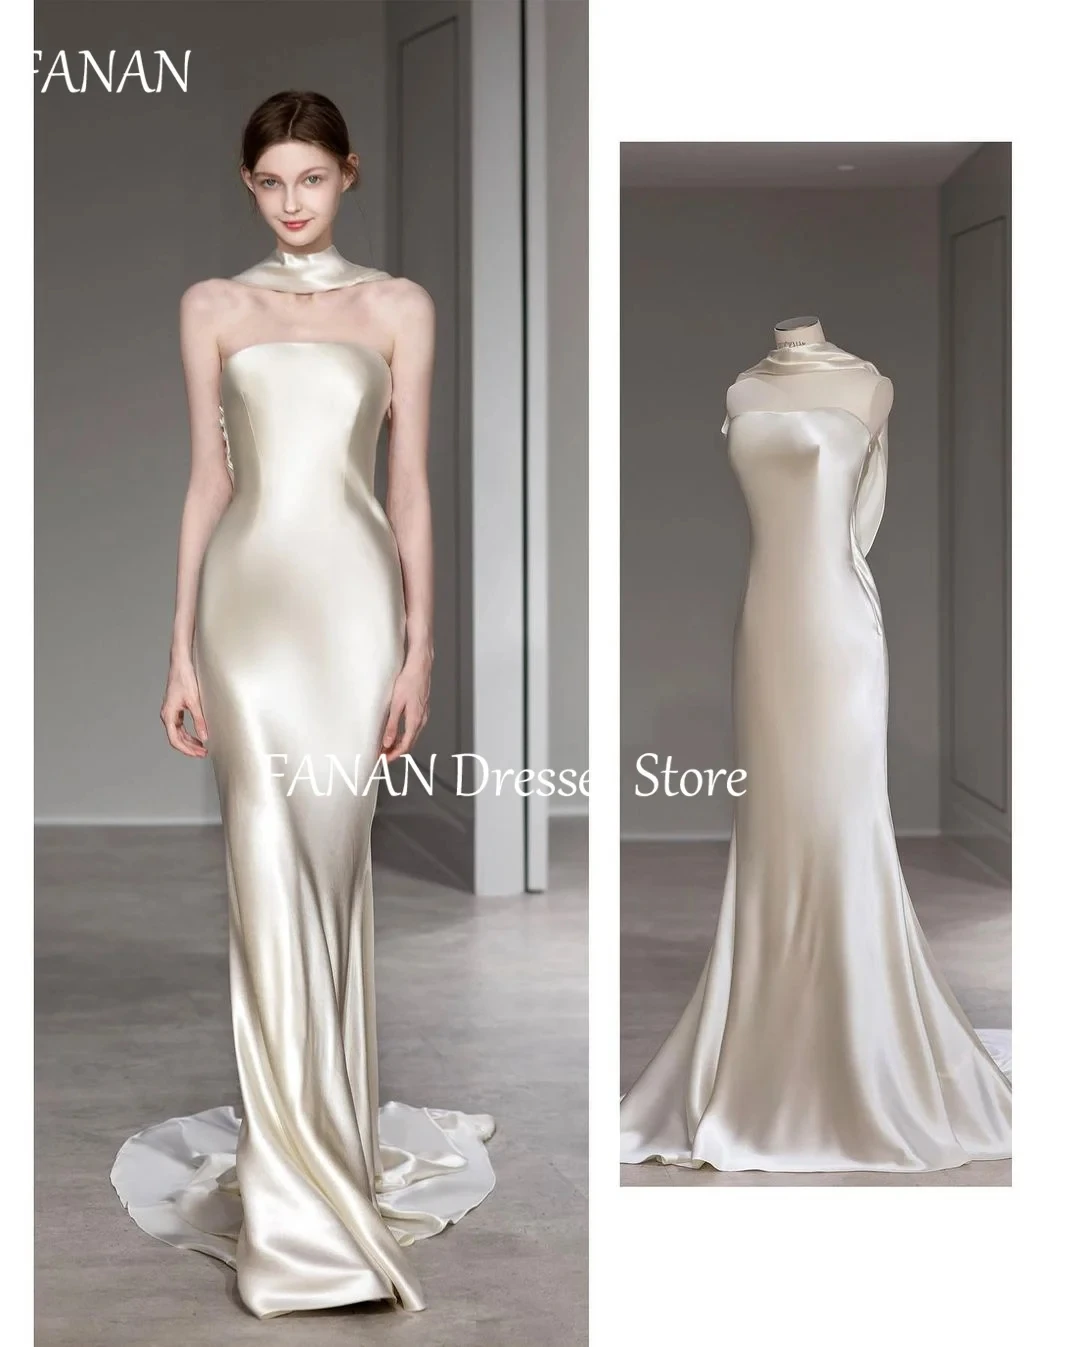 

FANAN Simple Korea Sheath Ivory Strapless Wedding Dresses Silk Satin Lace-up 웨딩드레스 Ruched Custom Made Bride Gowns Plus Size